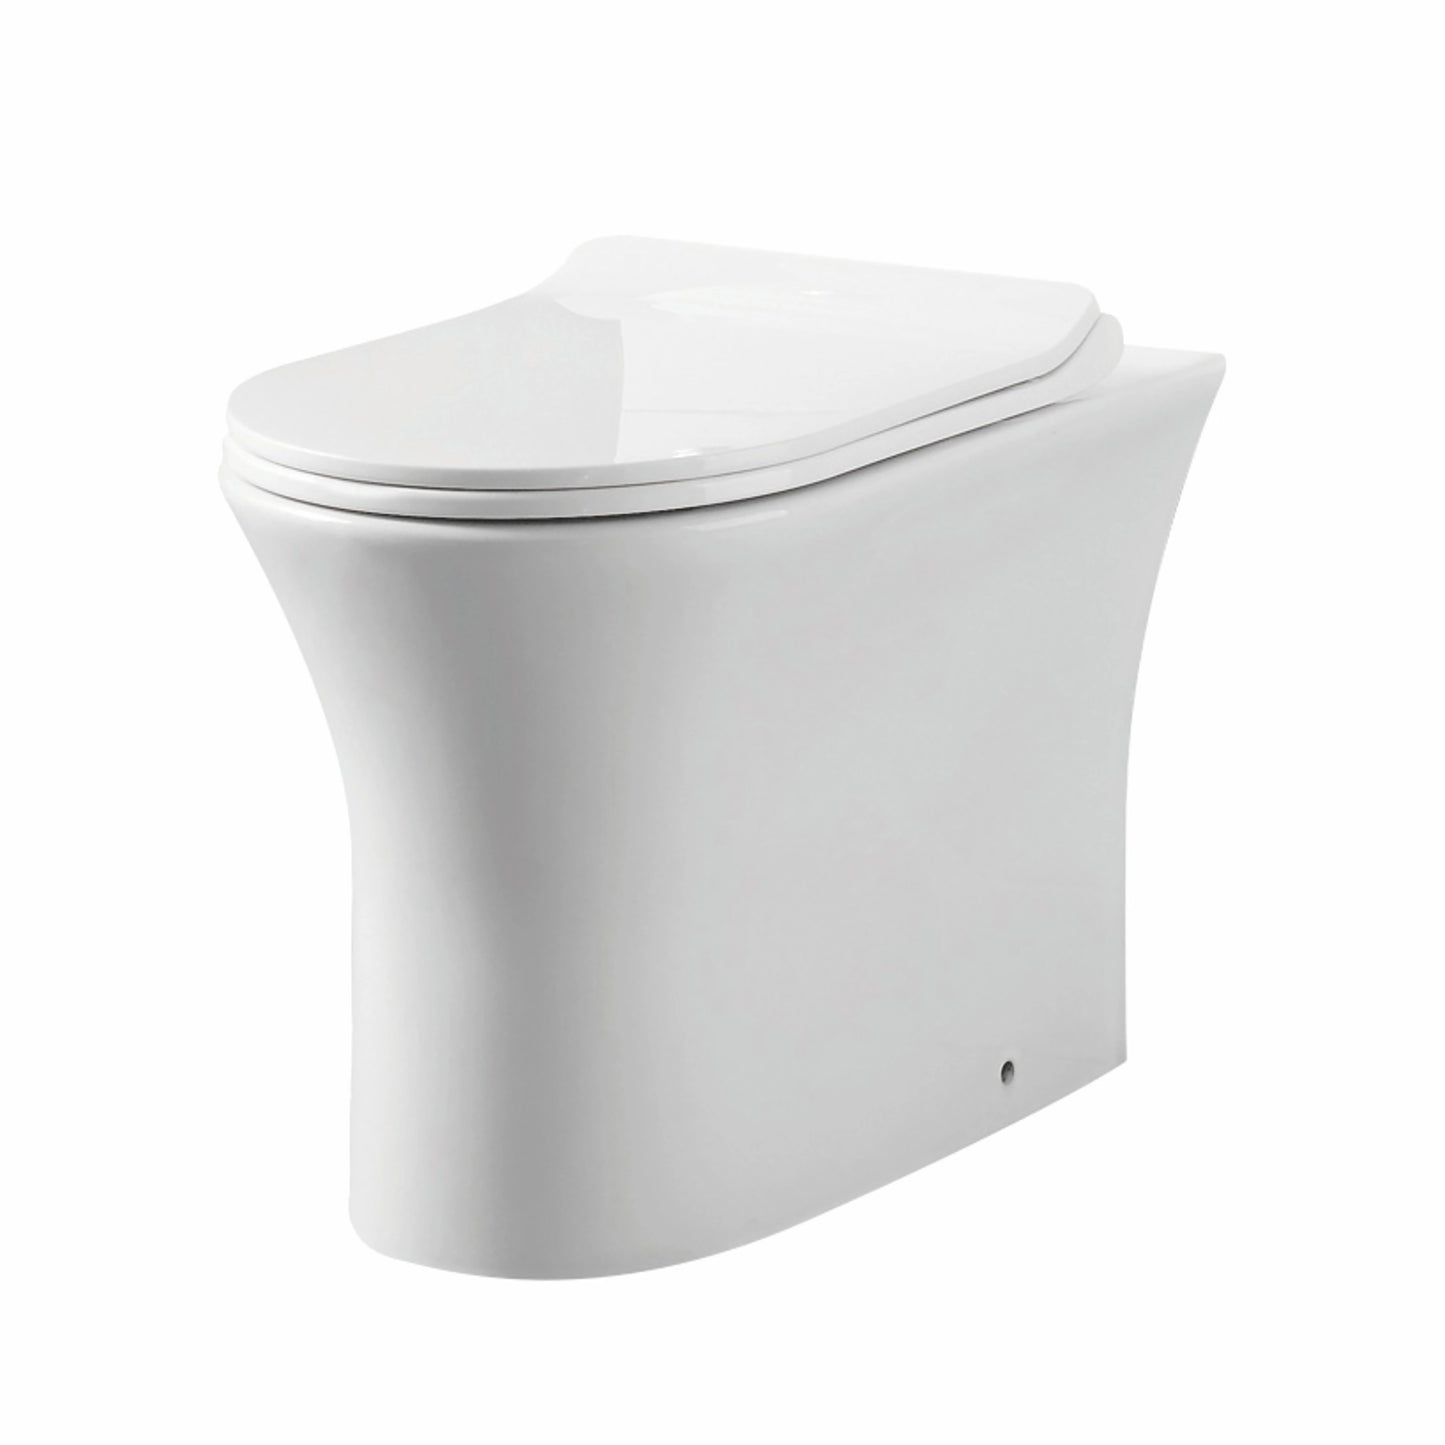 Deia Comfort Height Rimless Back to Wall Scudo WC Toilet with Soft Close Toilet Seat Option